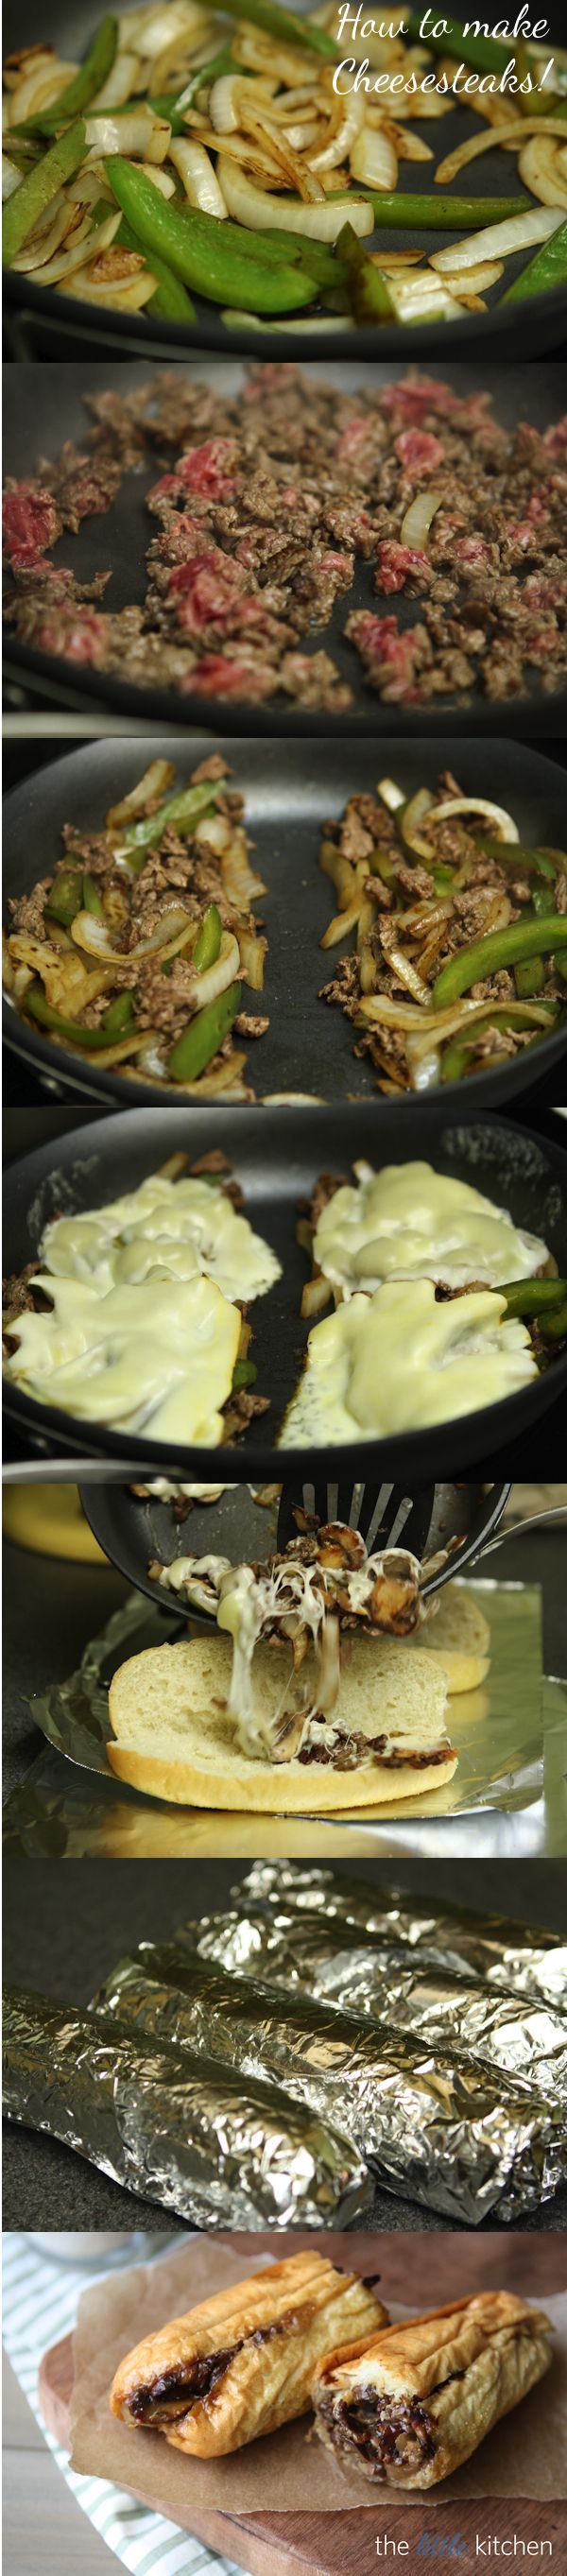 How make the BEST Cheesesteaks ever! {wrapping them in foil and putting them in the oven is the trick!}